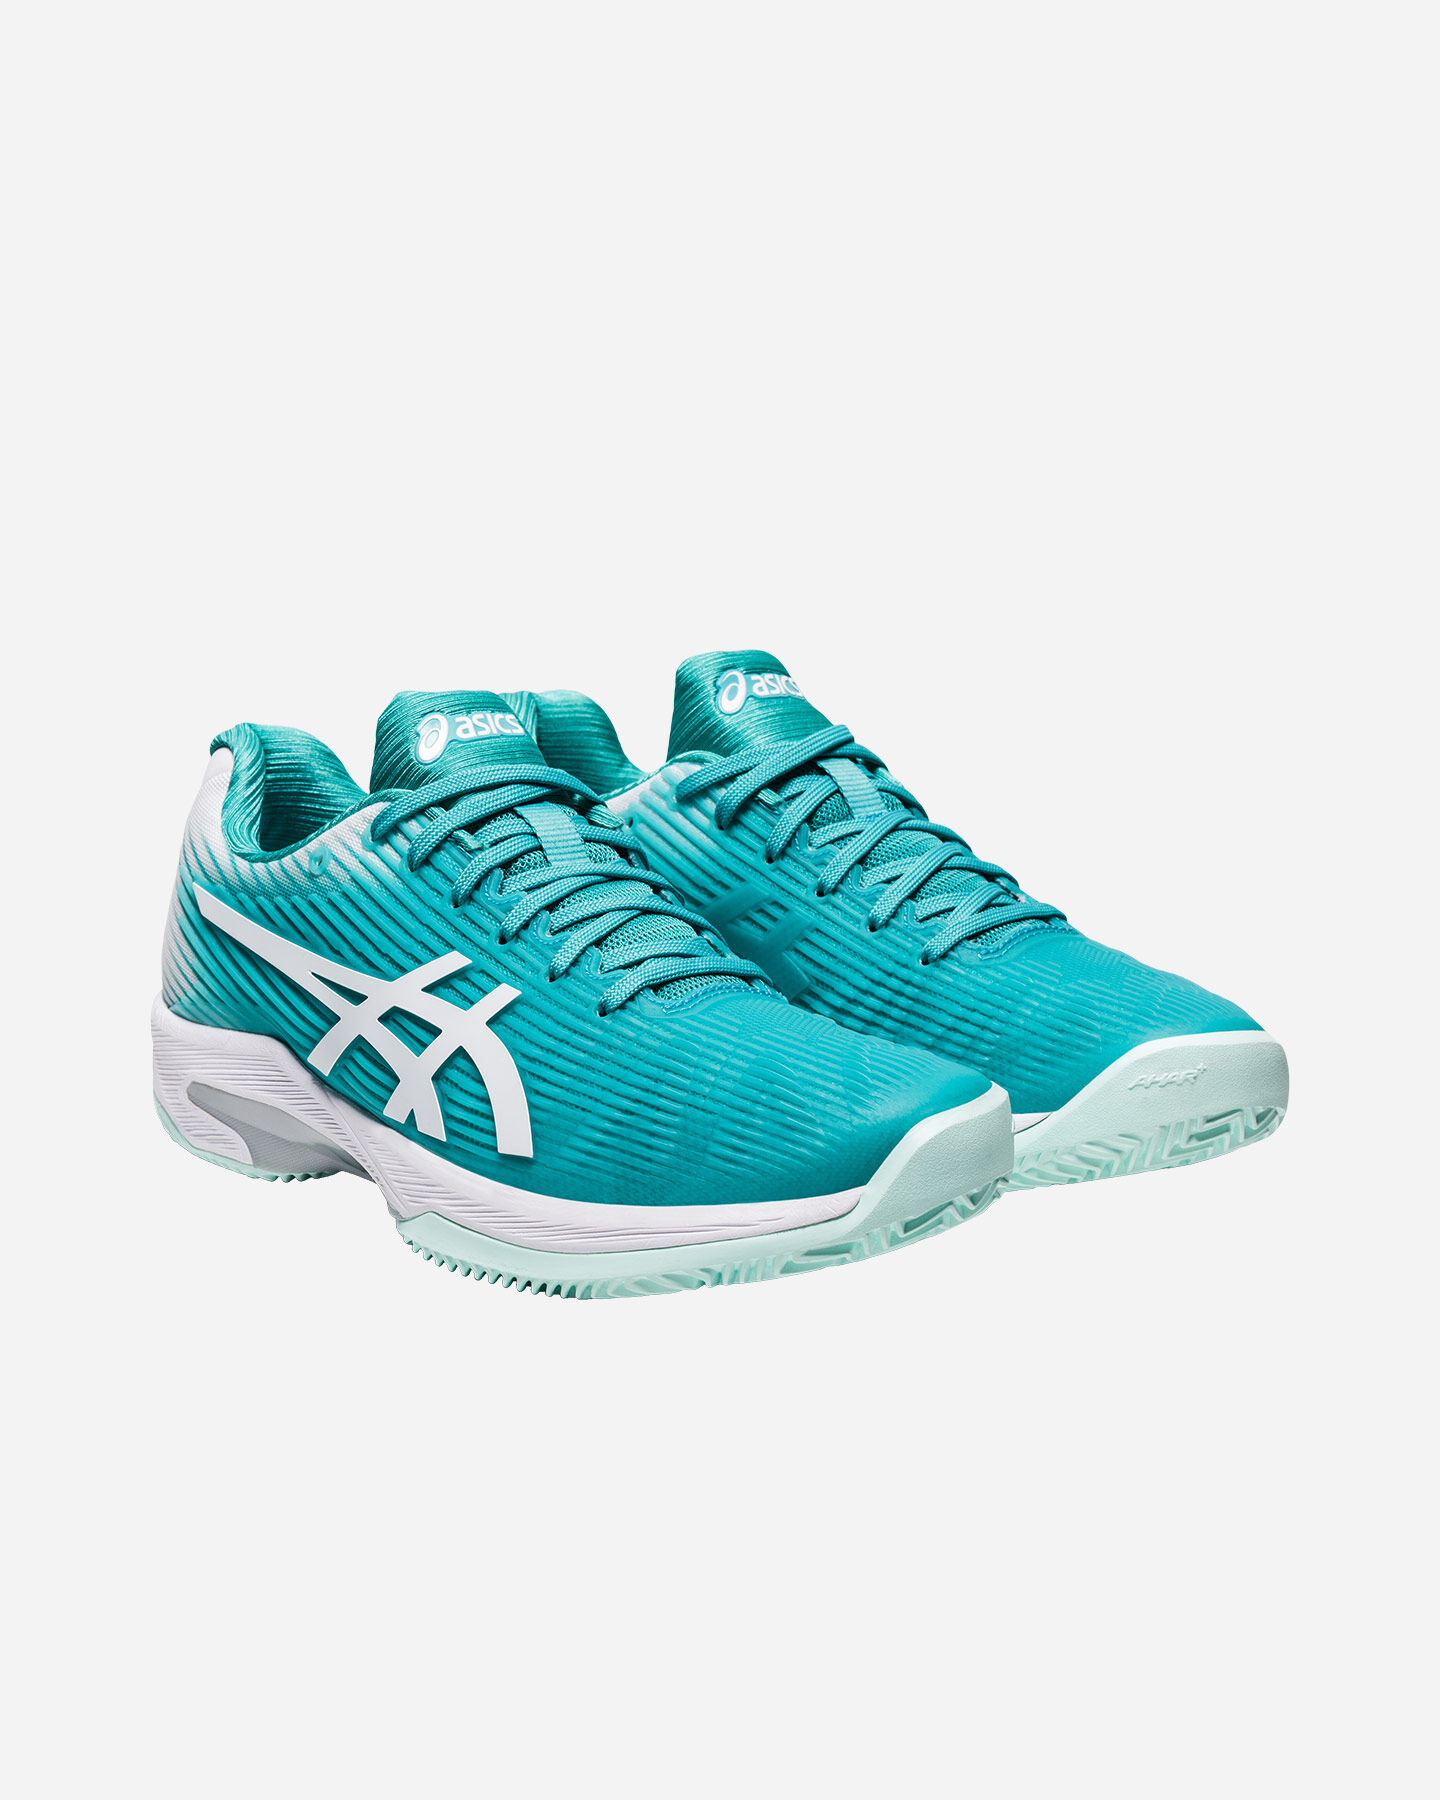  Scarpe tennis ASICS SOLUTION SPEED FF CLAY W S5213159|300|5 scatto 1